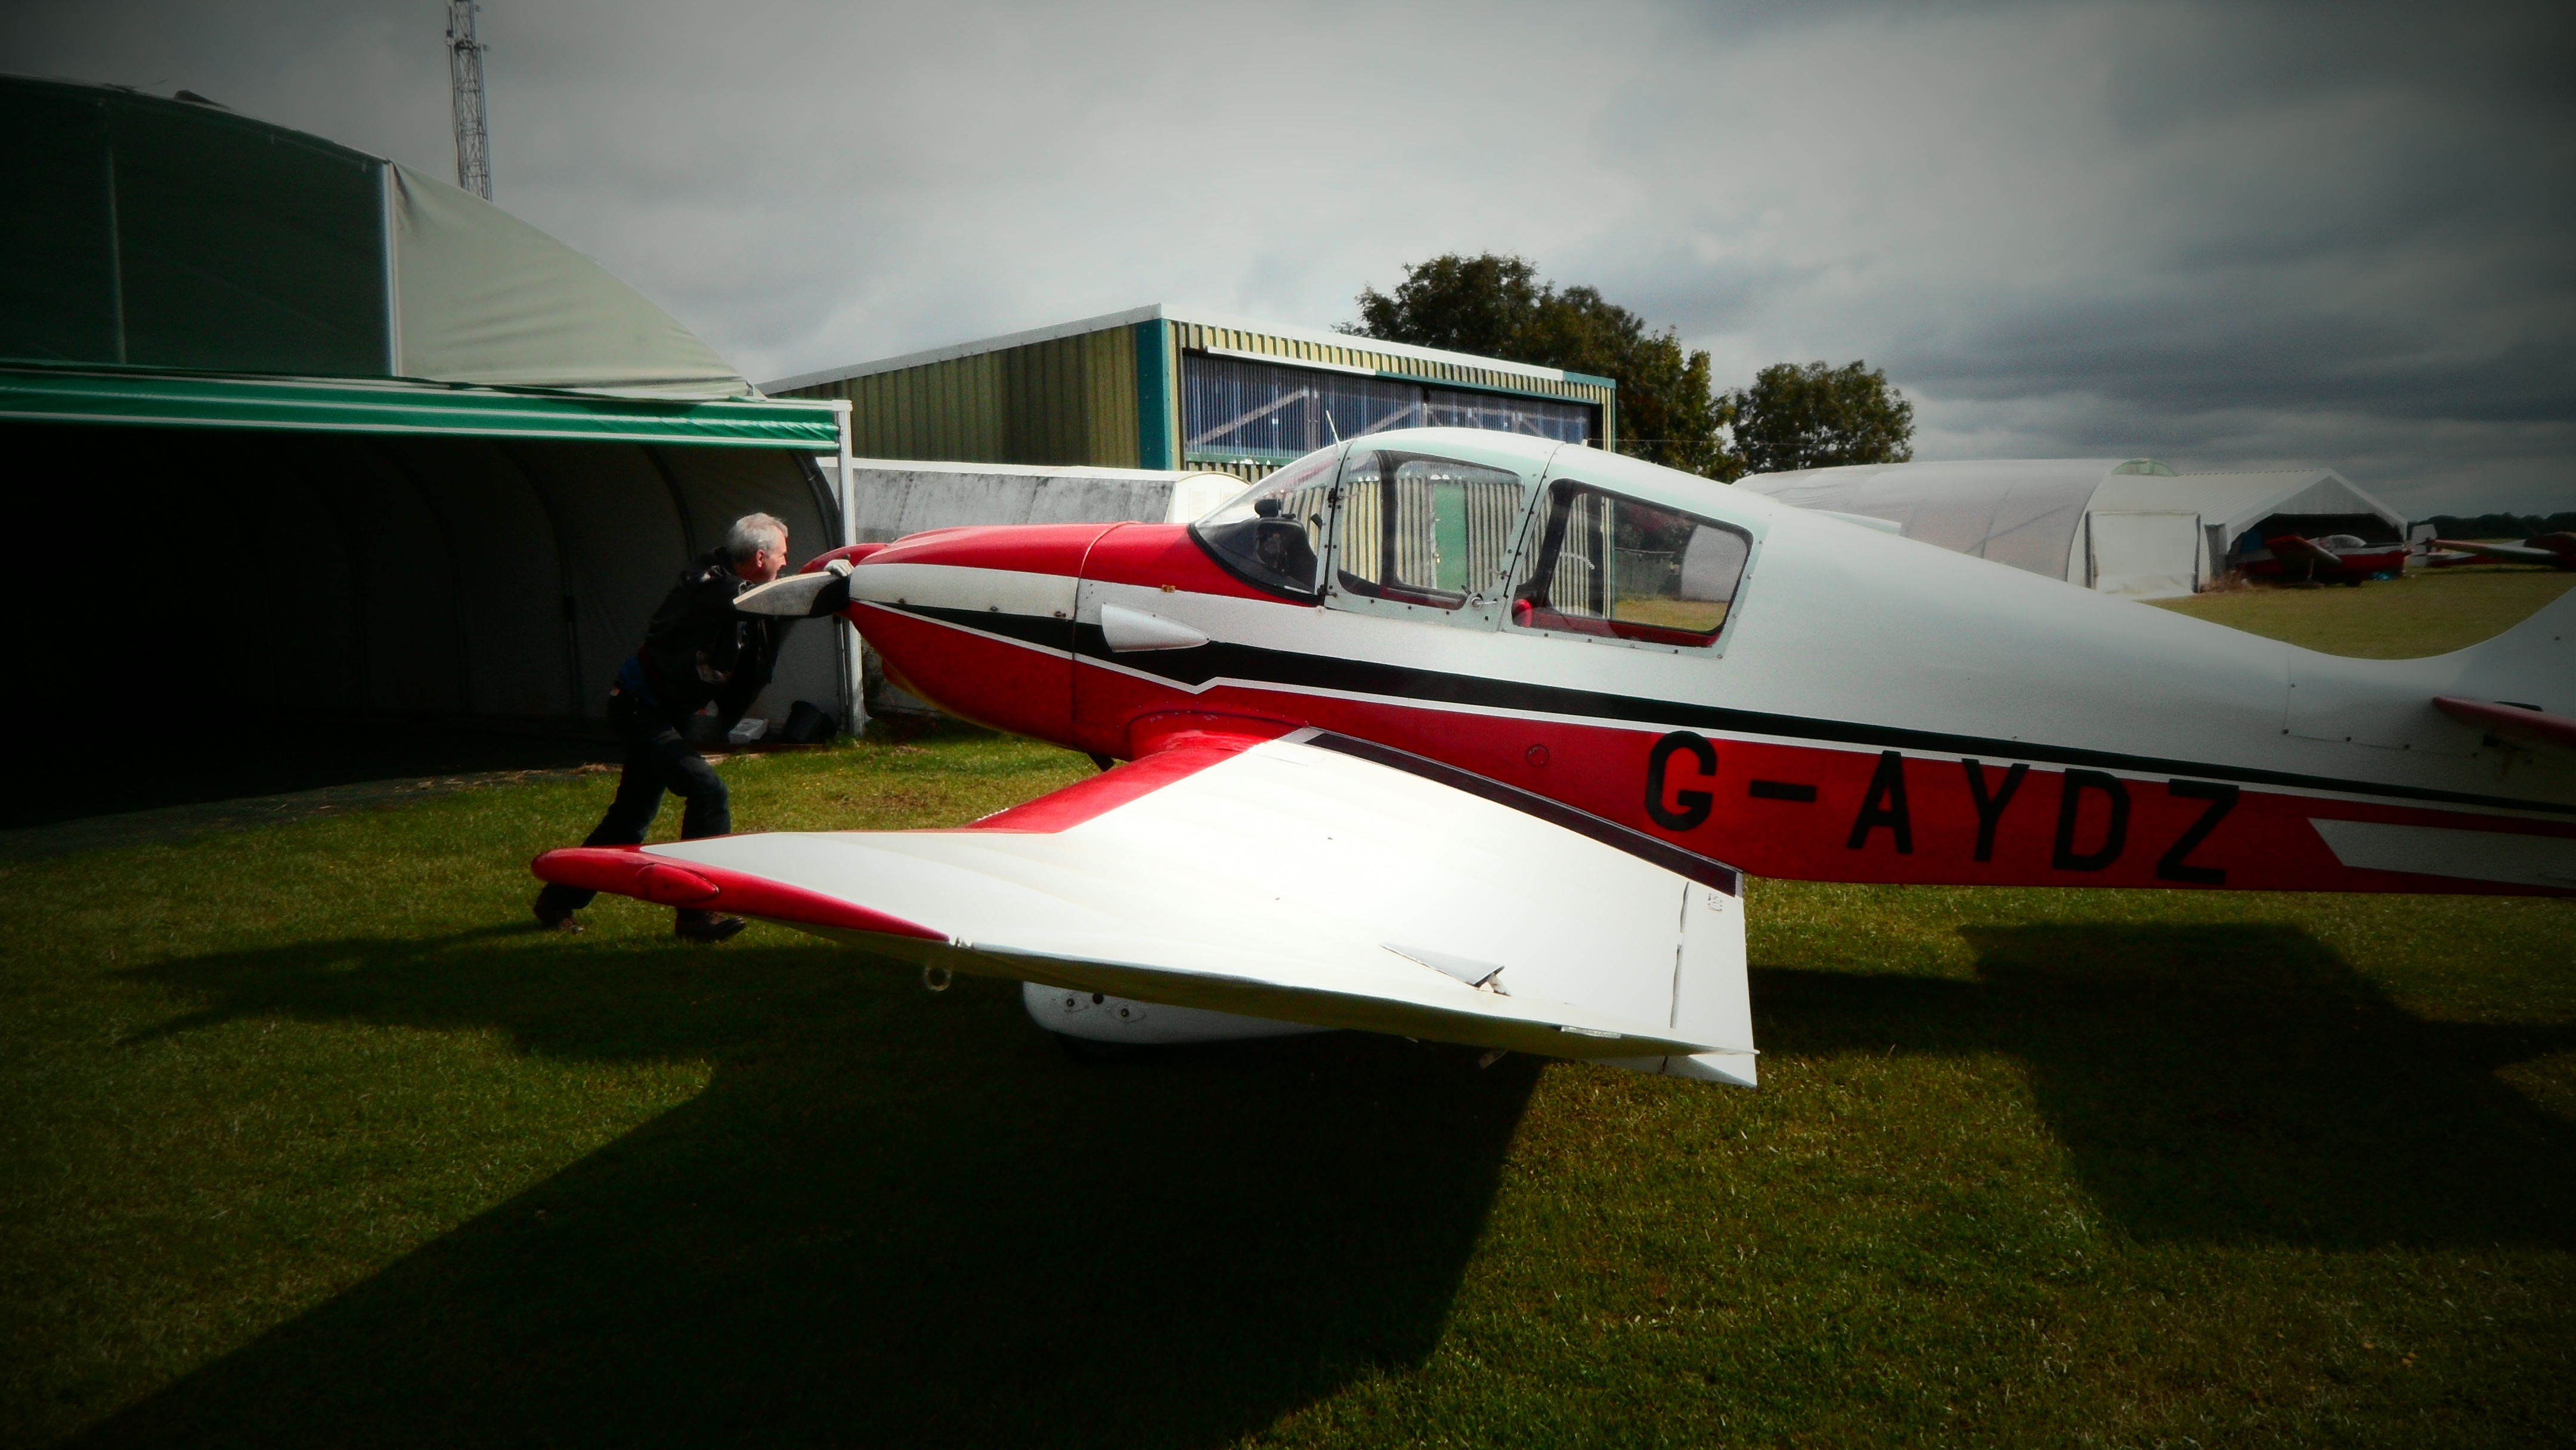 They call them light aircraft….